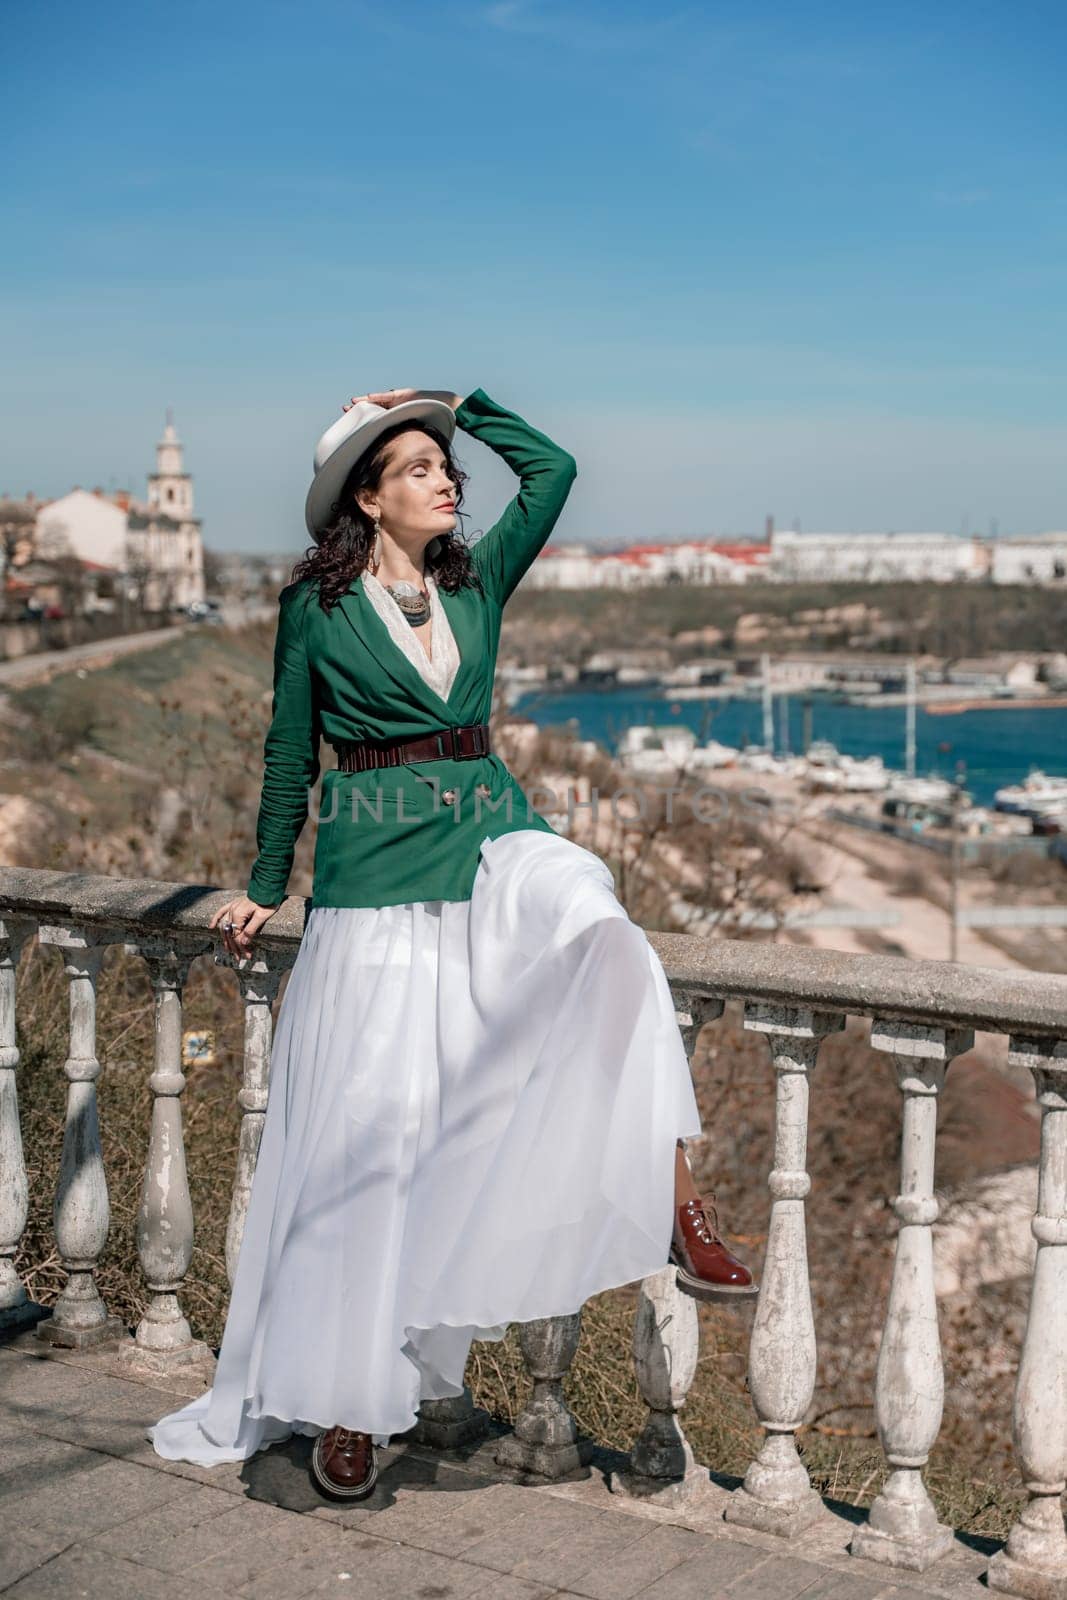 Woman walks around the city, lifestyle. A young beautiful woman in a green jacket, white skirt and hat is sitting on a white fence with balusters overlooking the sea bay and the city